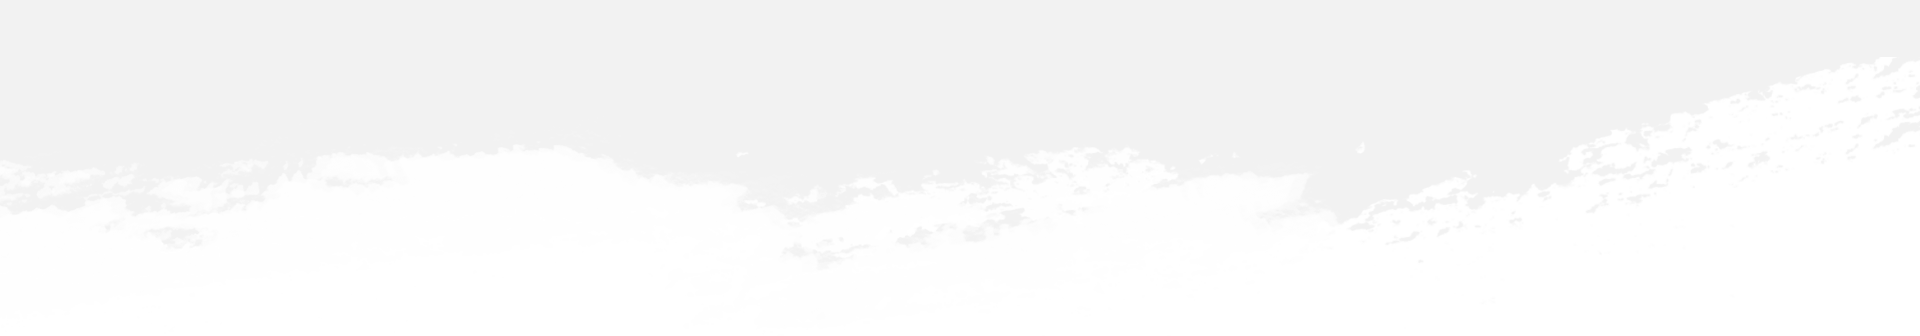 A green and white background with some type of design